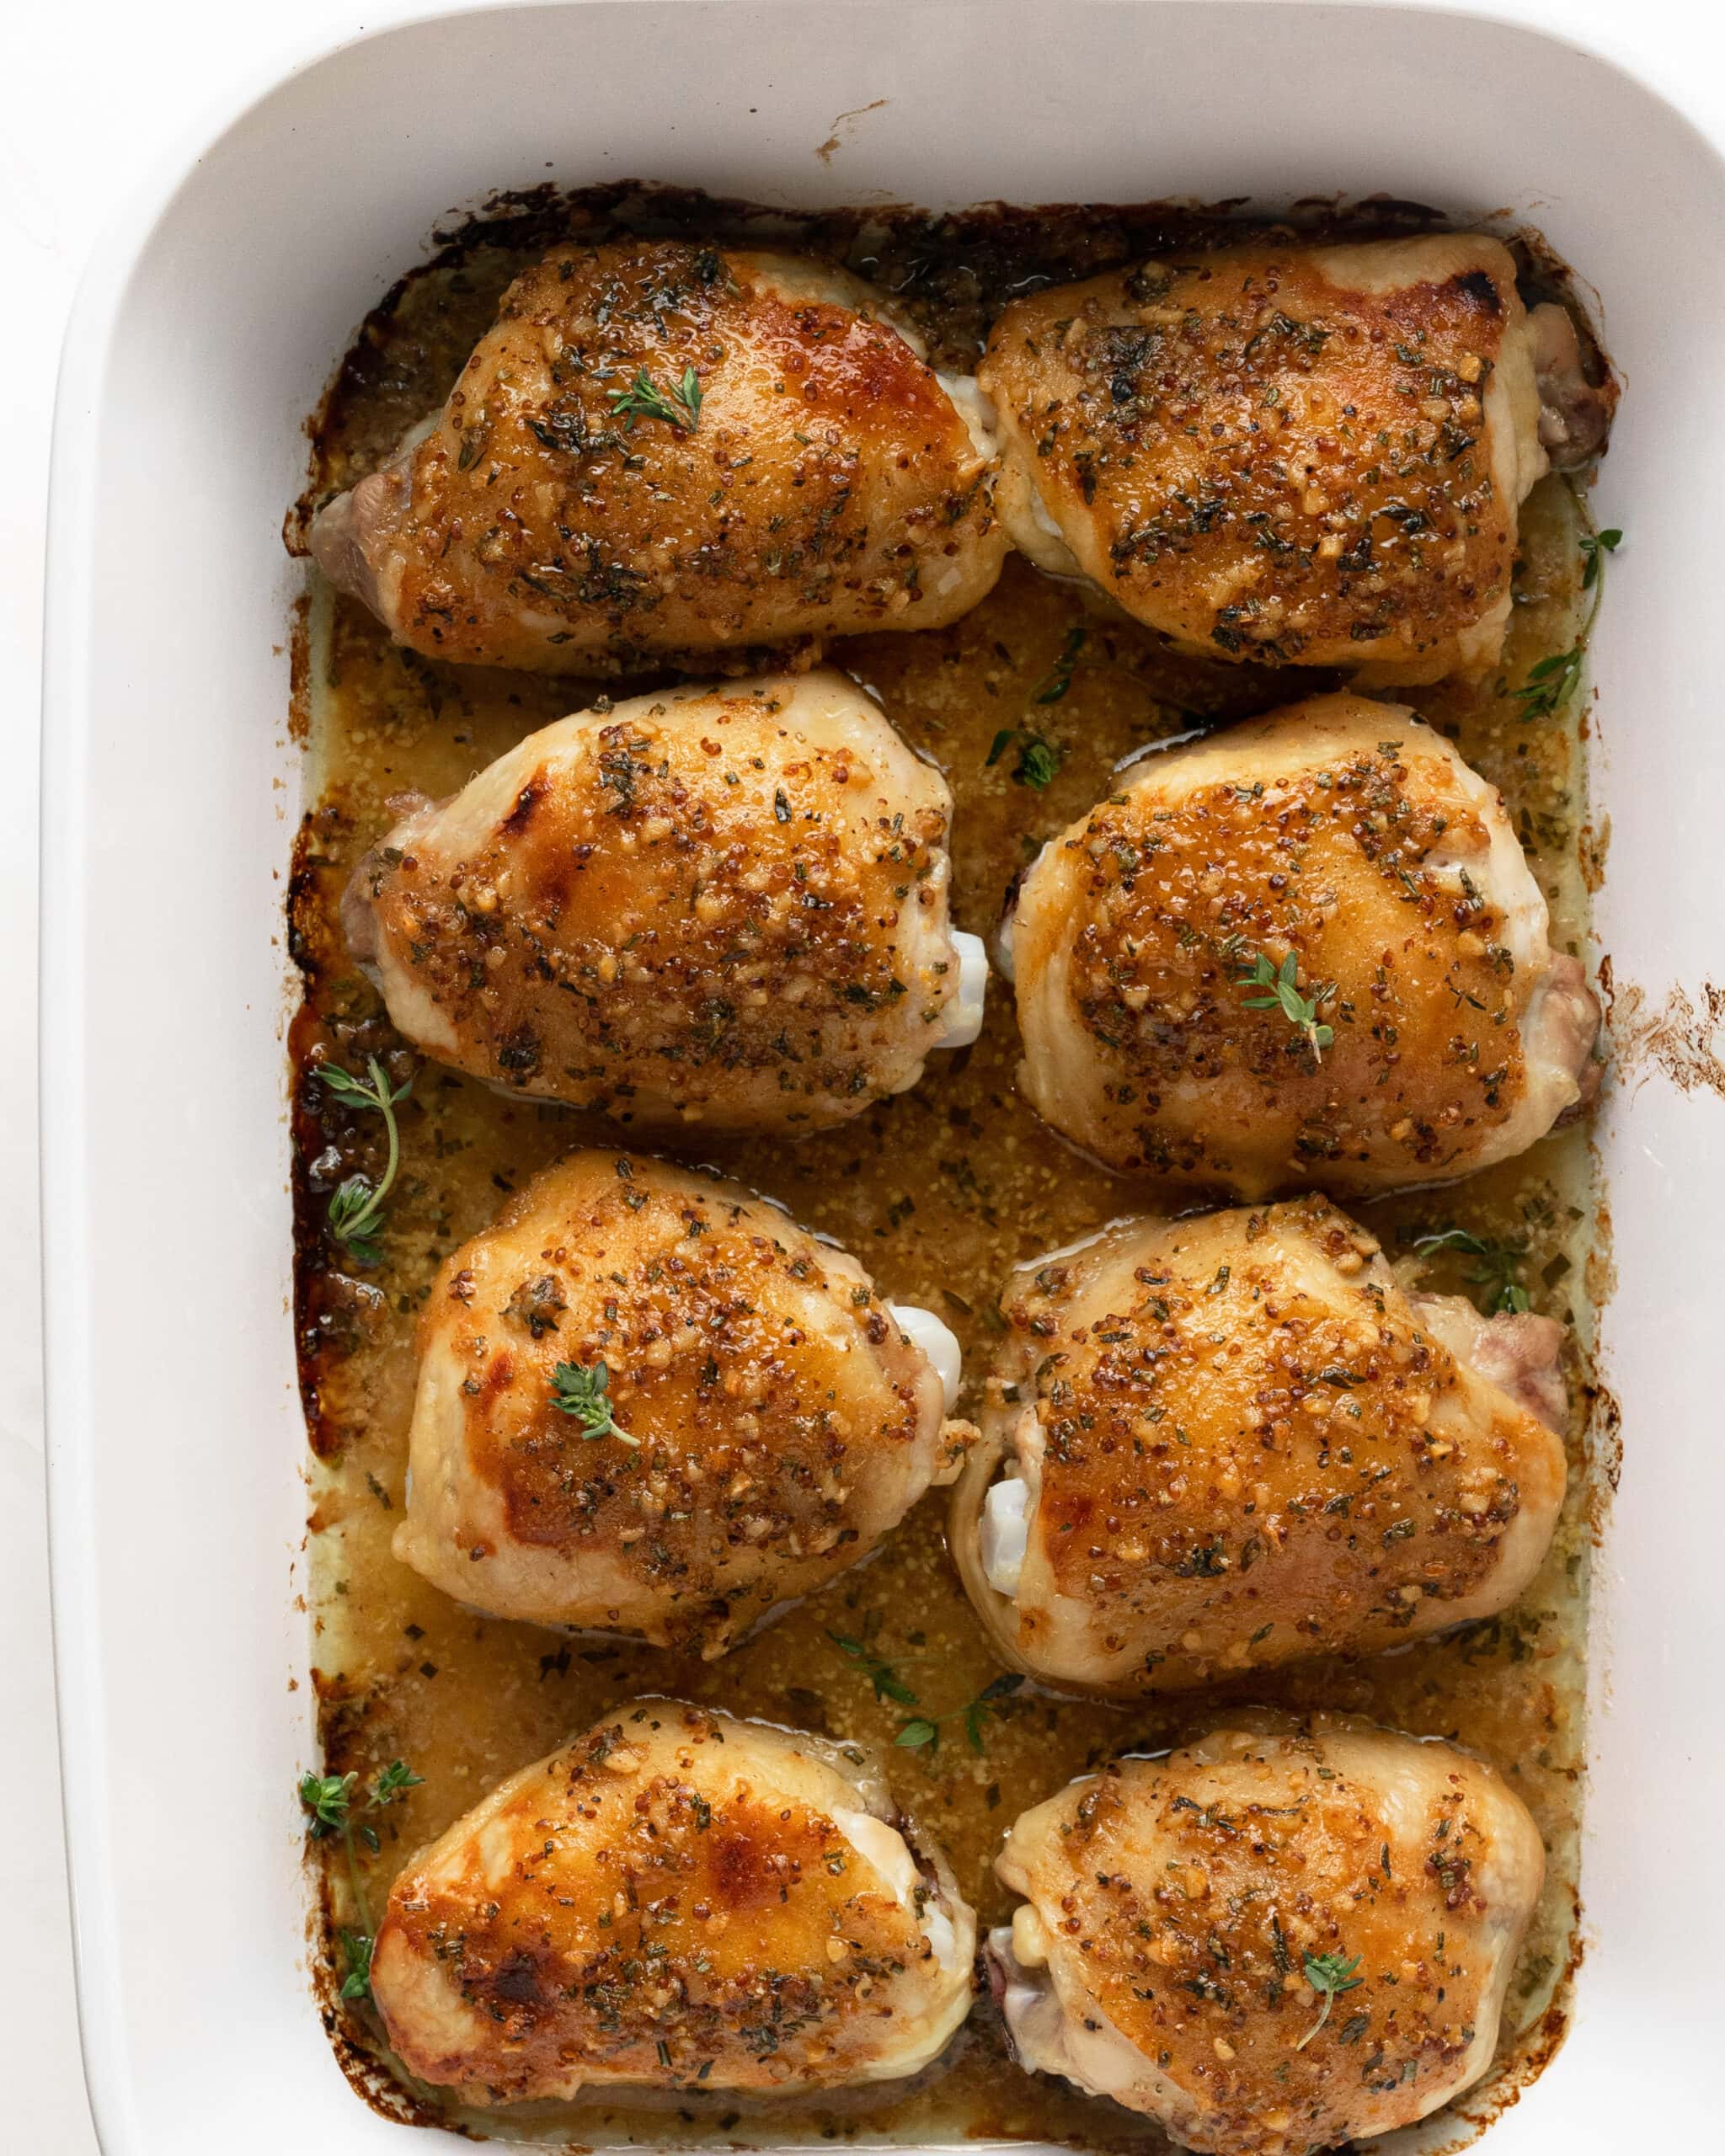 Large white rectangular pan with 8 bone-in chicken thighs topped with a honey mustard sauce.